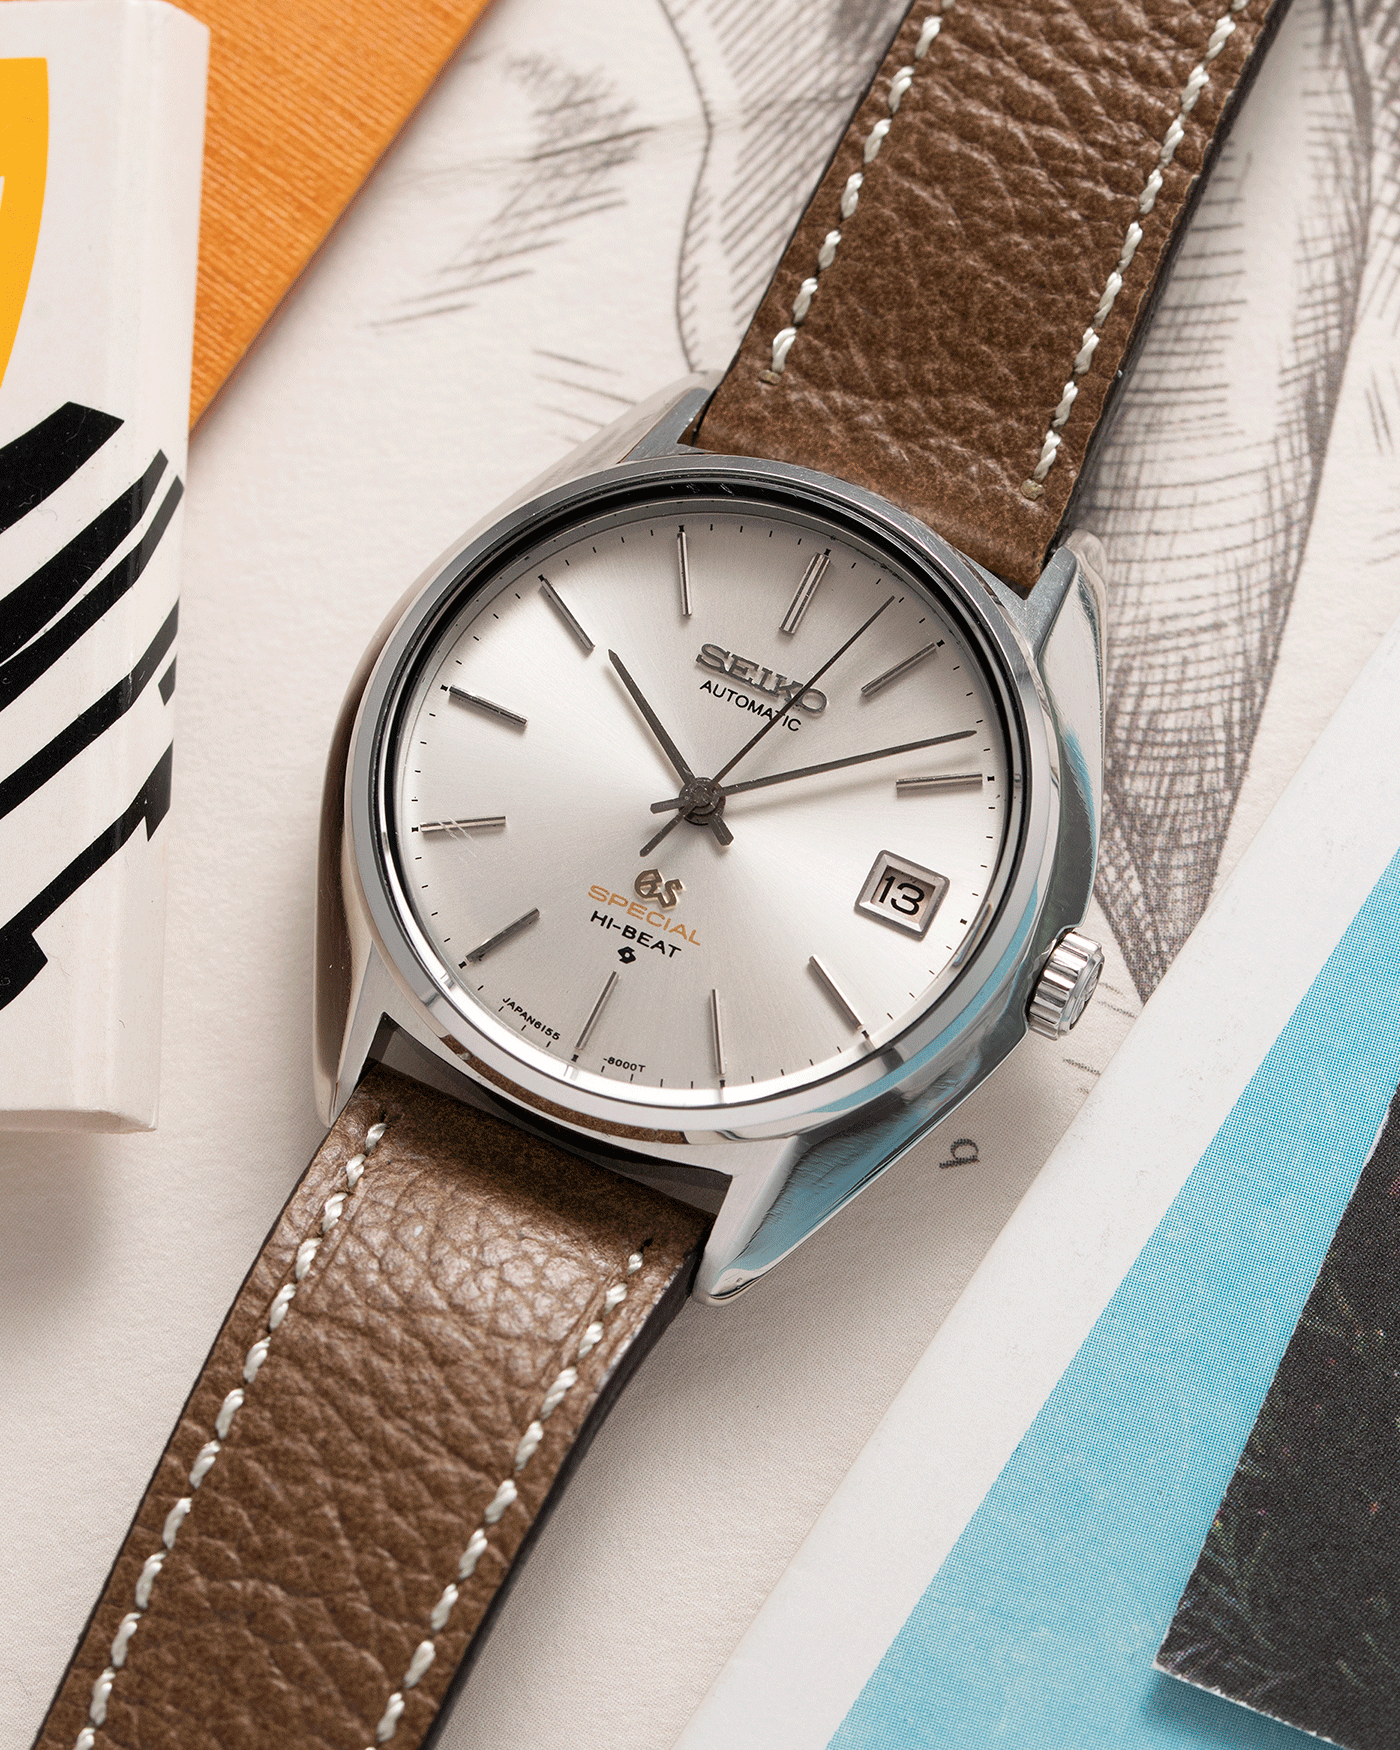 Brand: Grand Seiko Year: Circa 1970’s Reference Number: 6155-8000 Material: Stainless Steel Movement: Cal 6155 Case Diameter: 36.5mm Lug Width: 18mm Bracelet/Strap: Unbranded Chestnut Brown Textured Leather